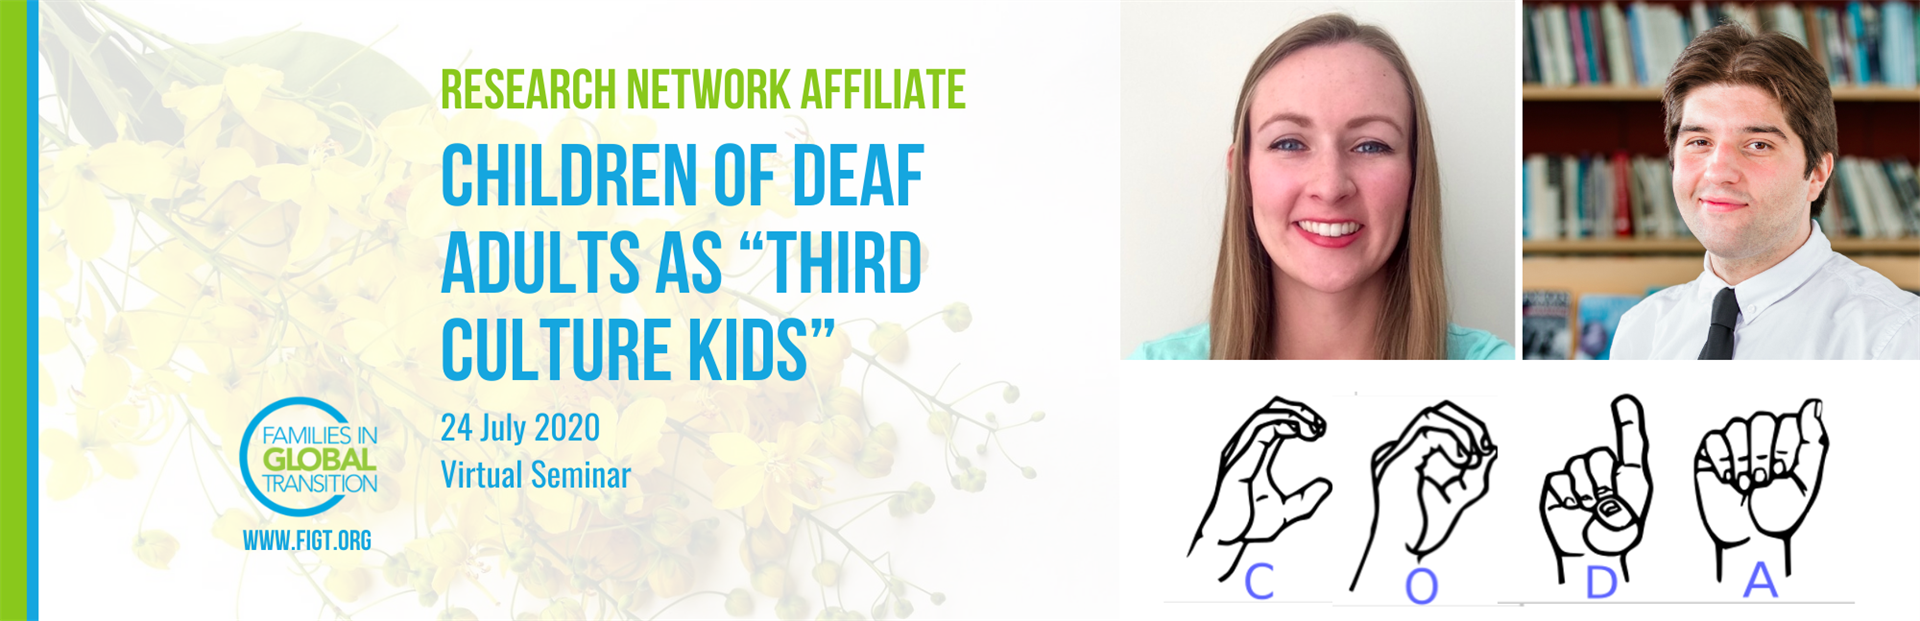 Blog title: FIGT research network affiliate - Children of Deaf adults as third culture kids